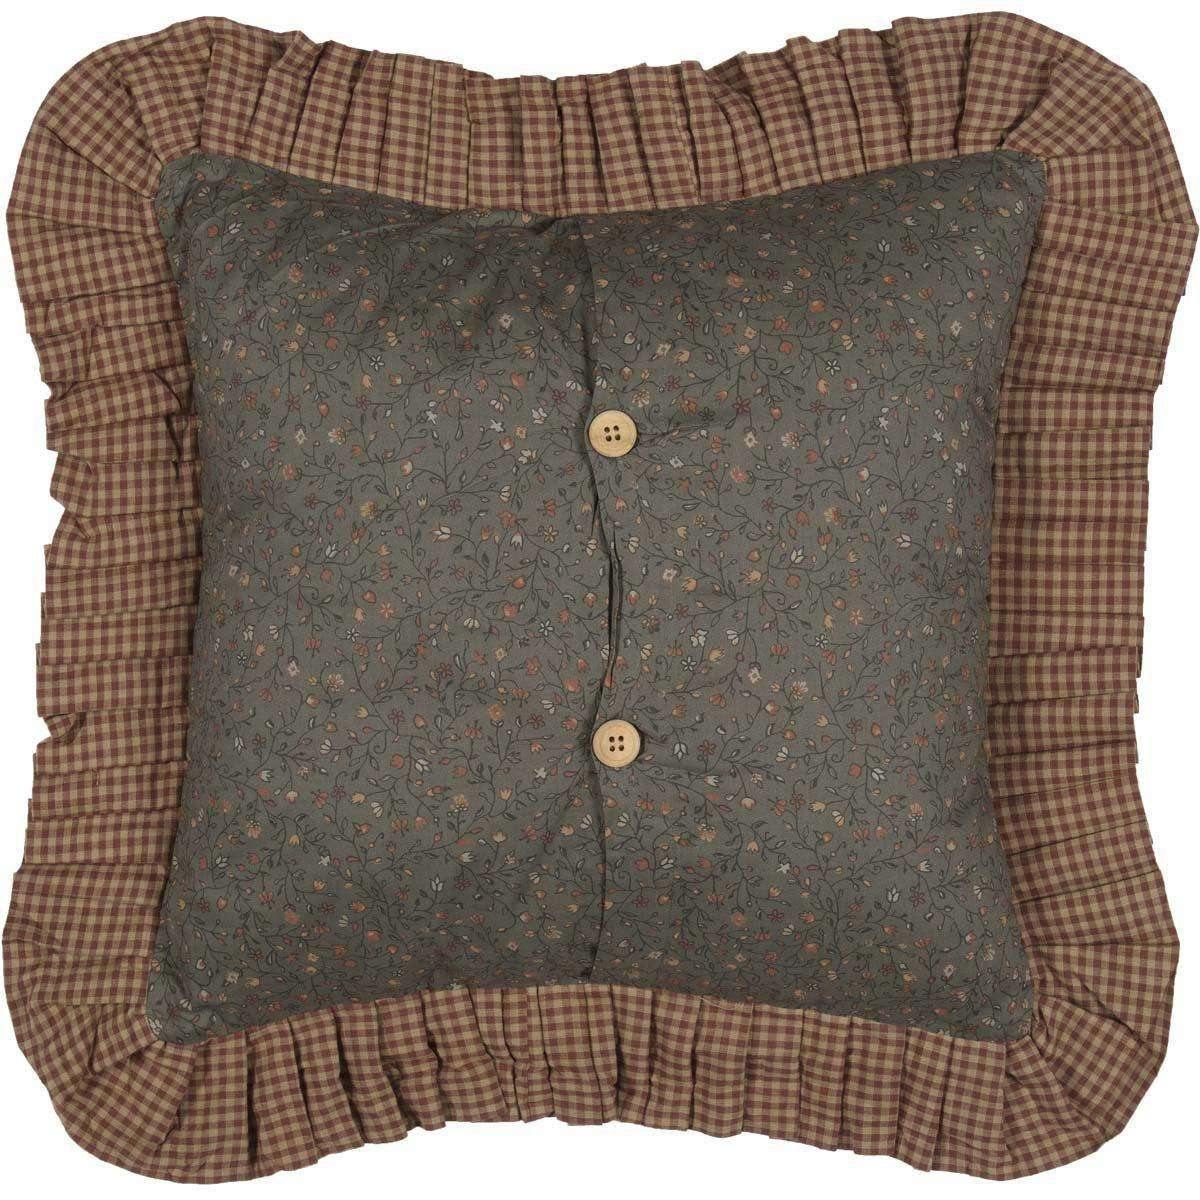 Crosswoods Patchwork Pillow 18x18 VHC Brands back